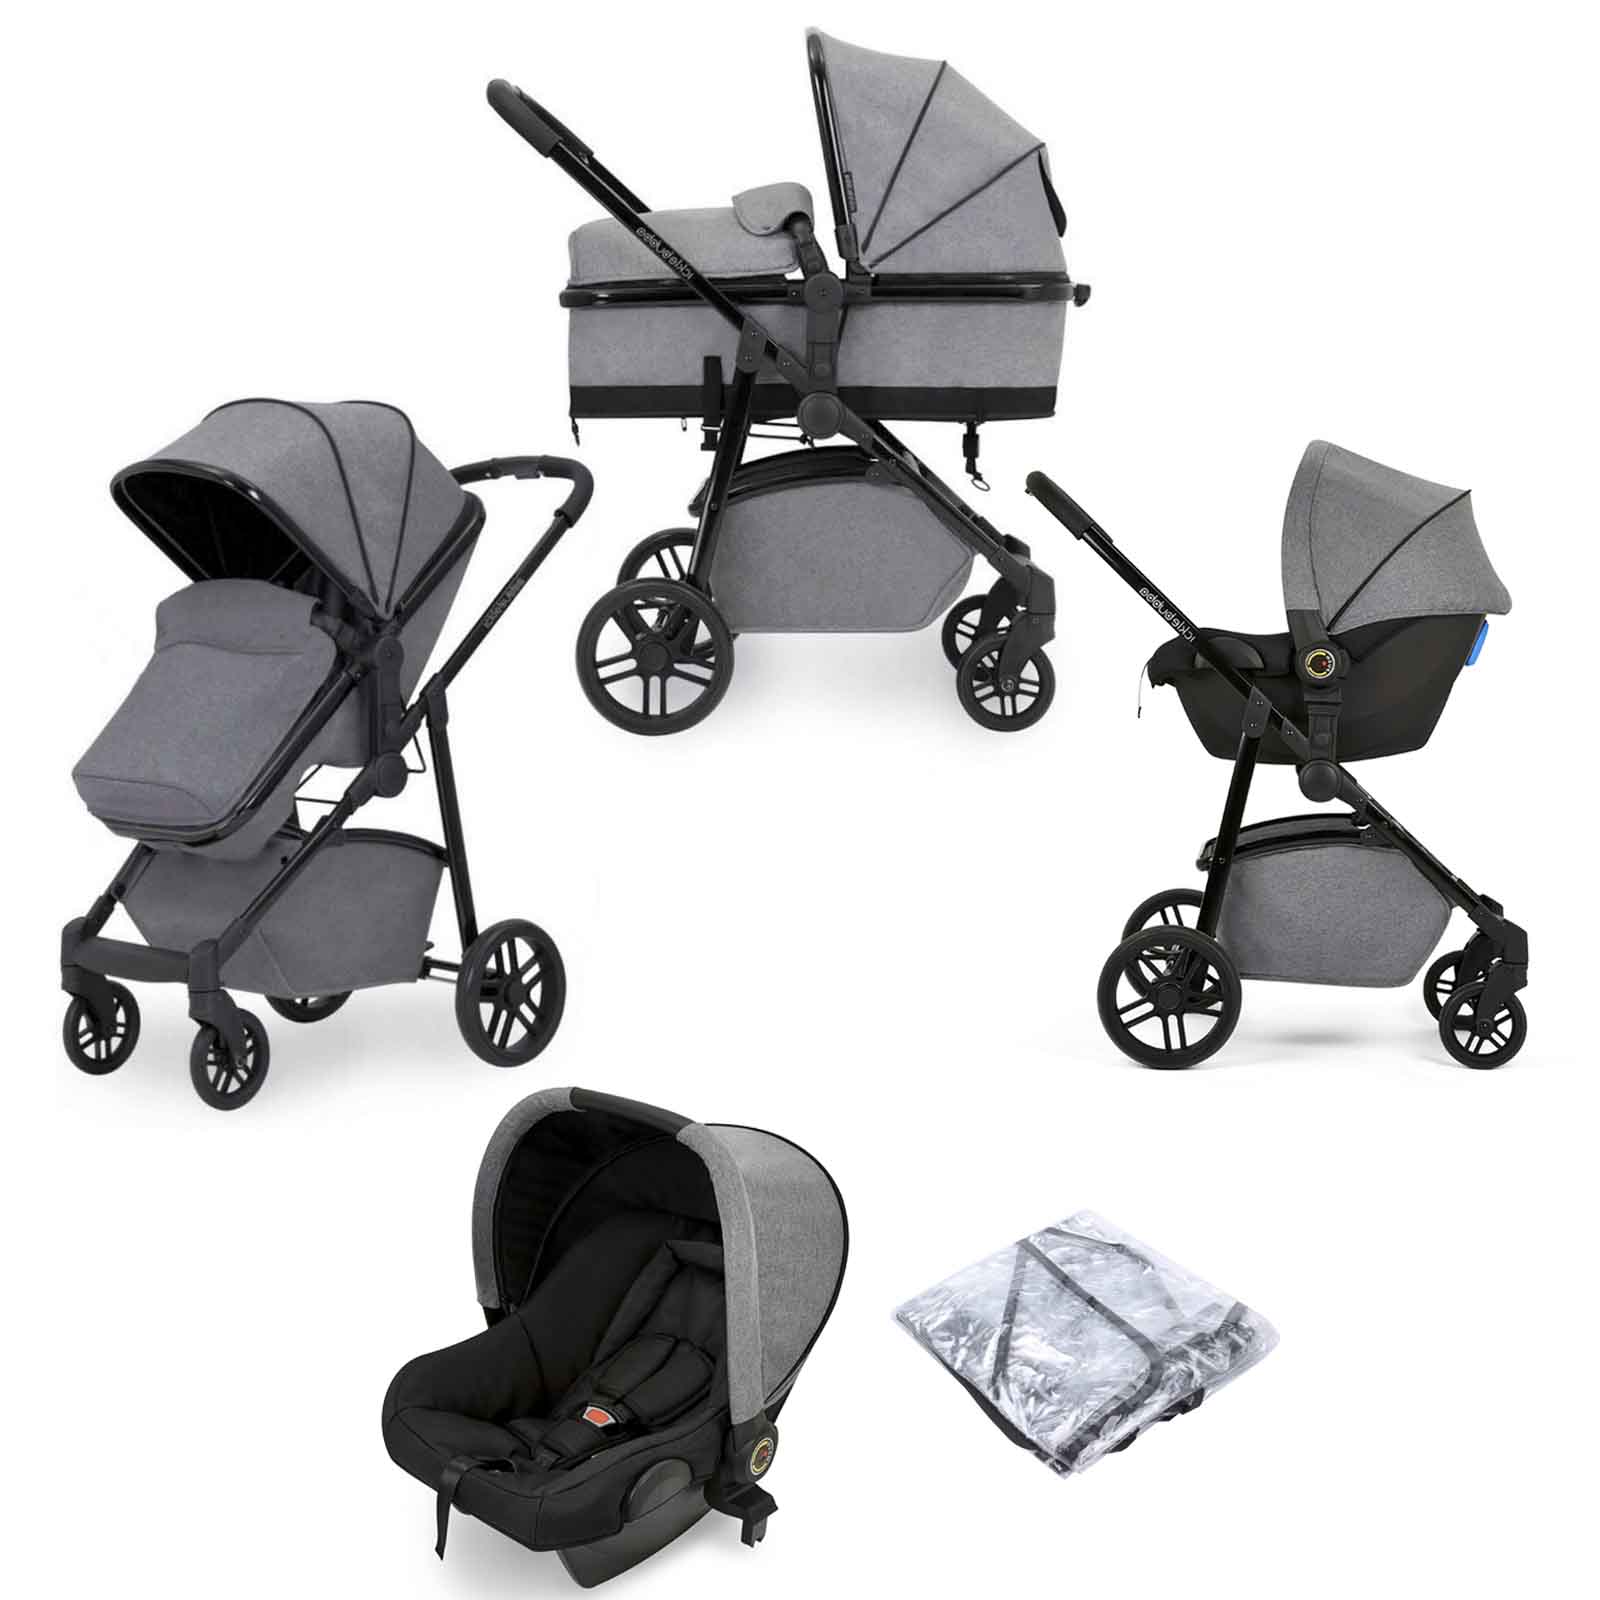 Ickle Bubba Moon 3in1 Travel System - Light Grey